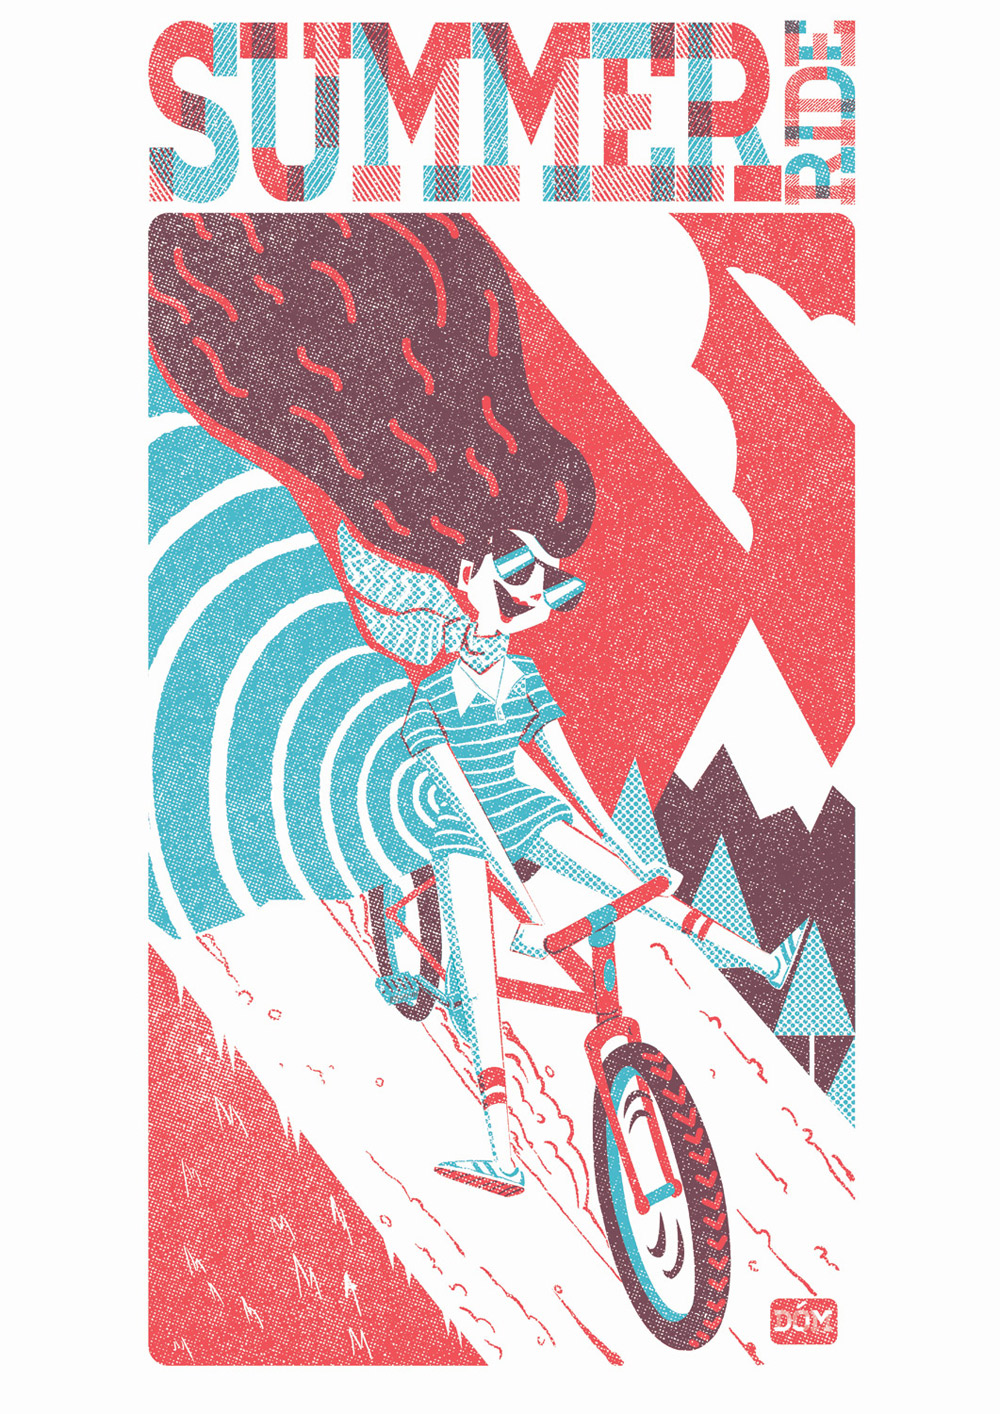  Limited edition screen print for Artcrank USA exhibition, UK. 